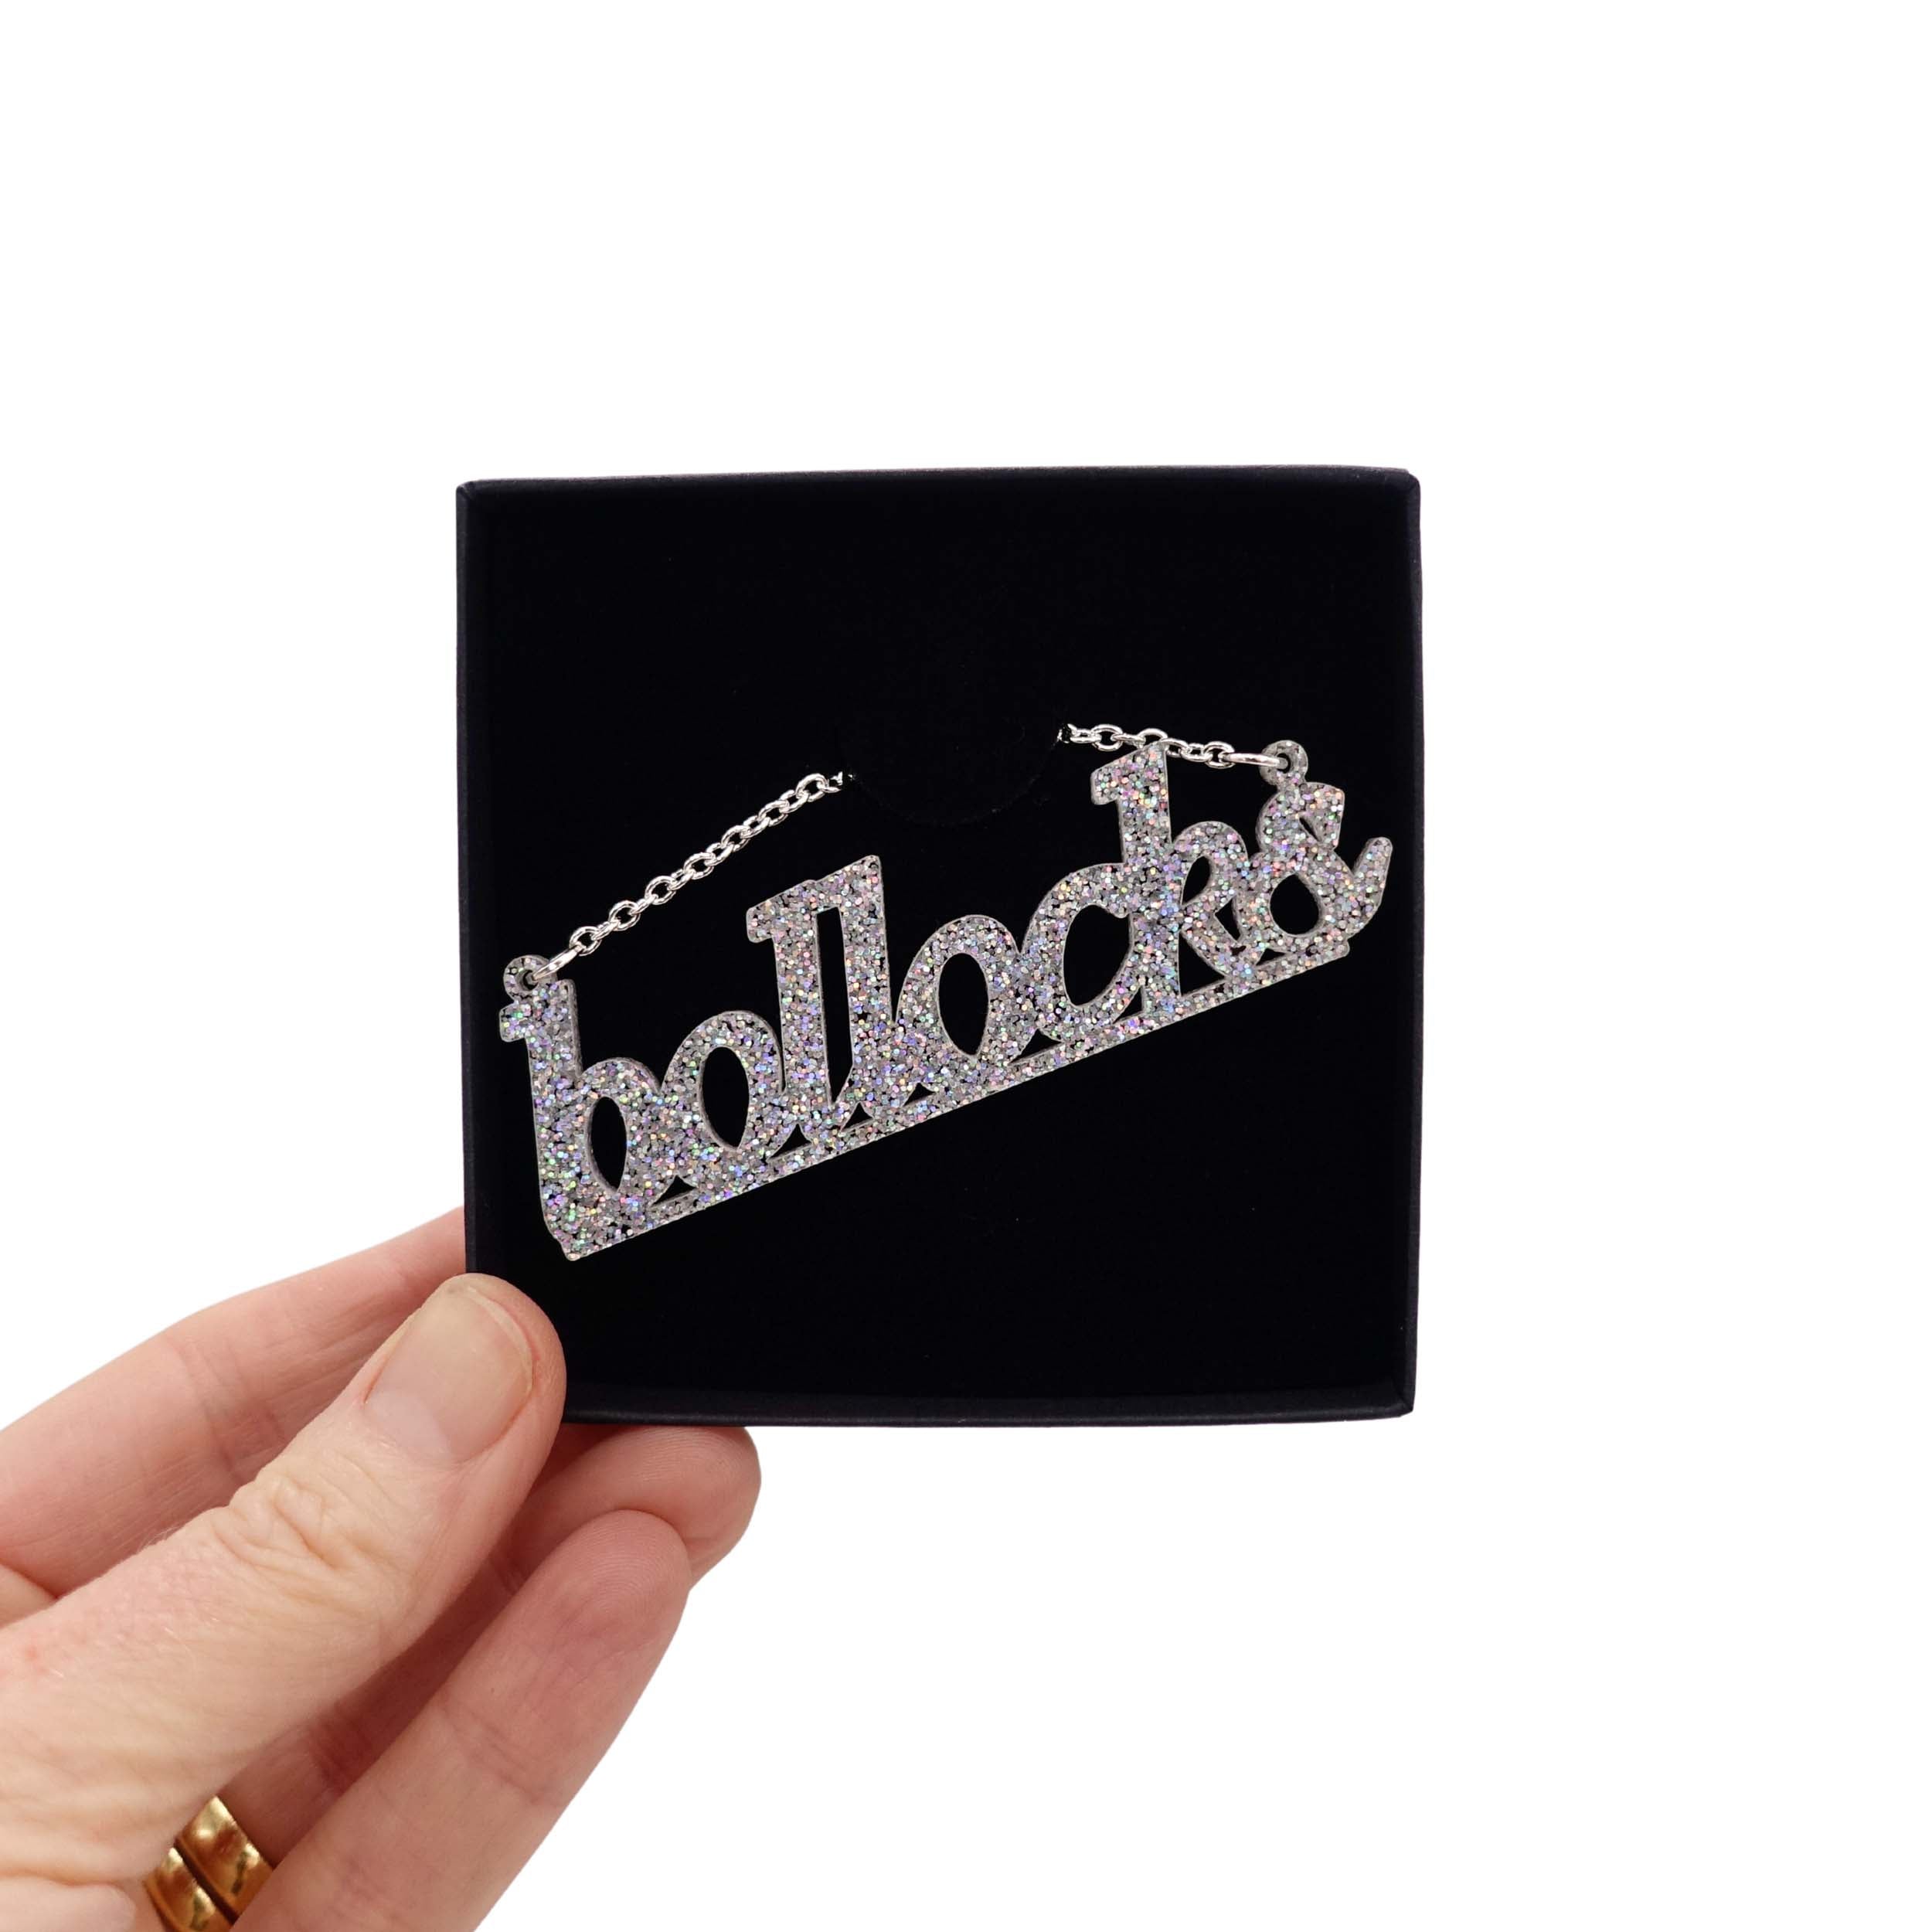 Bollocks necklace in silver glitter shown in a Wear and Resist gift box. 